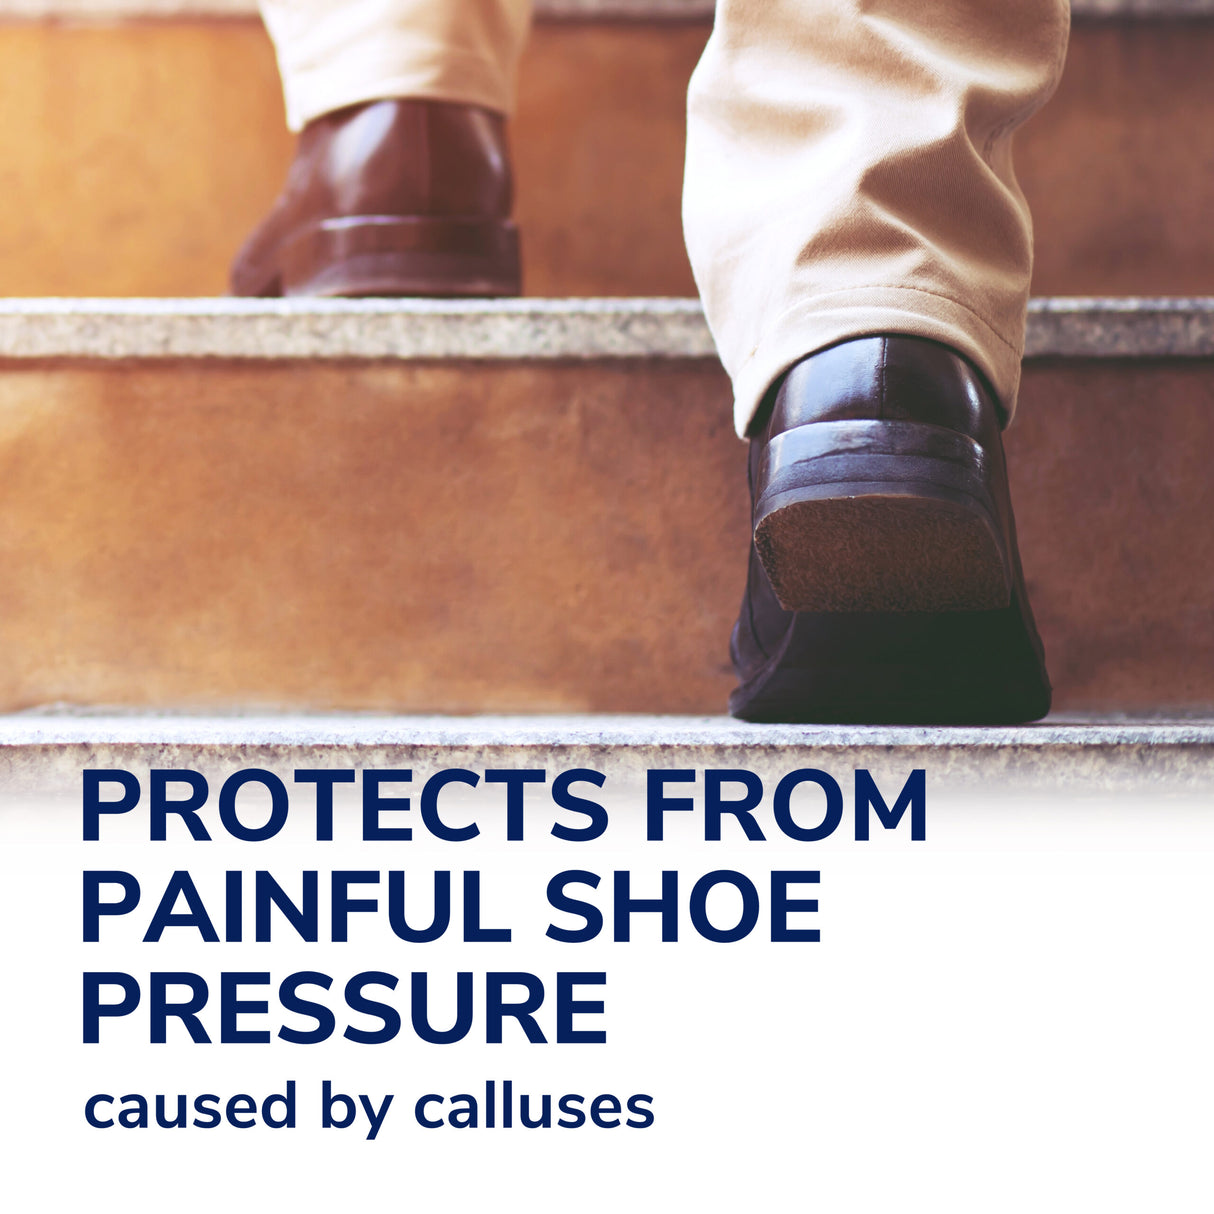 image of protects from painful shoe pressure caused by calluses